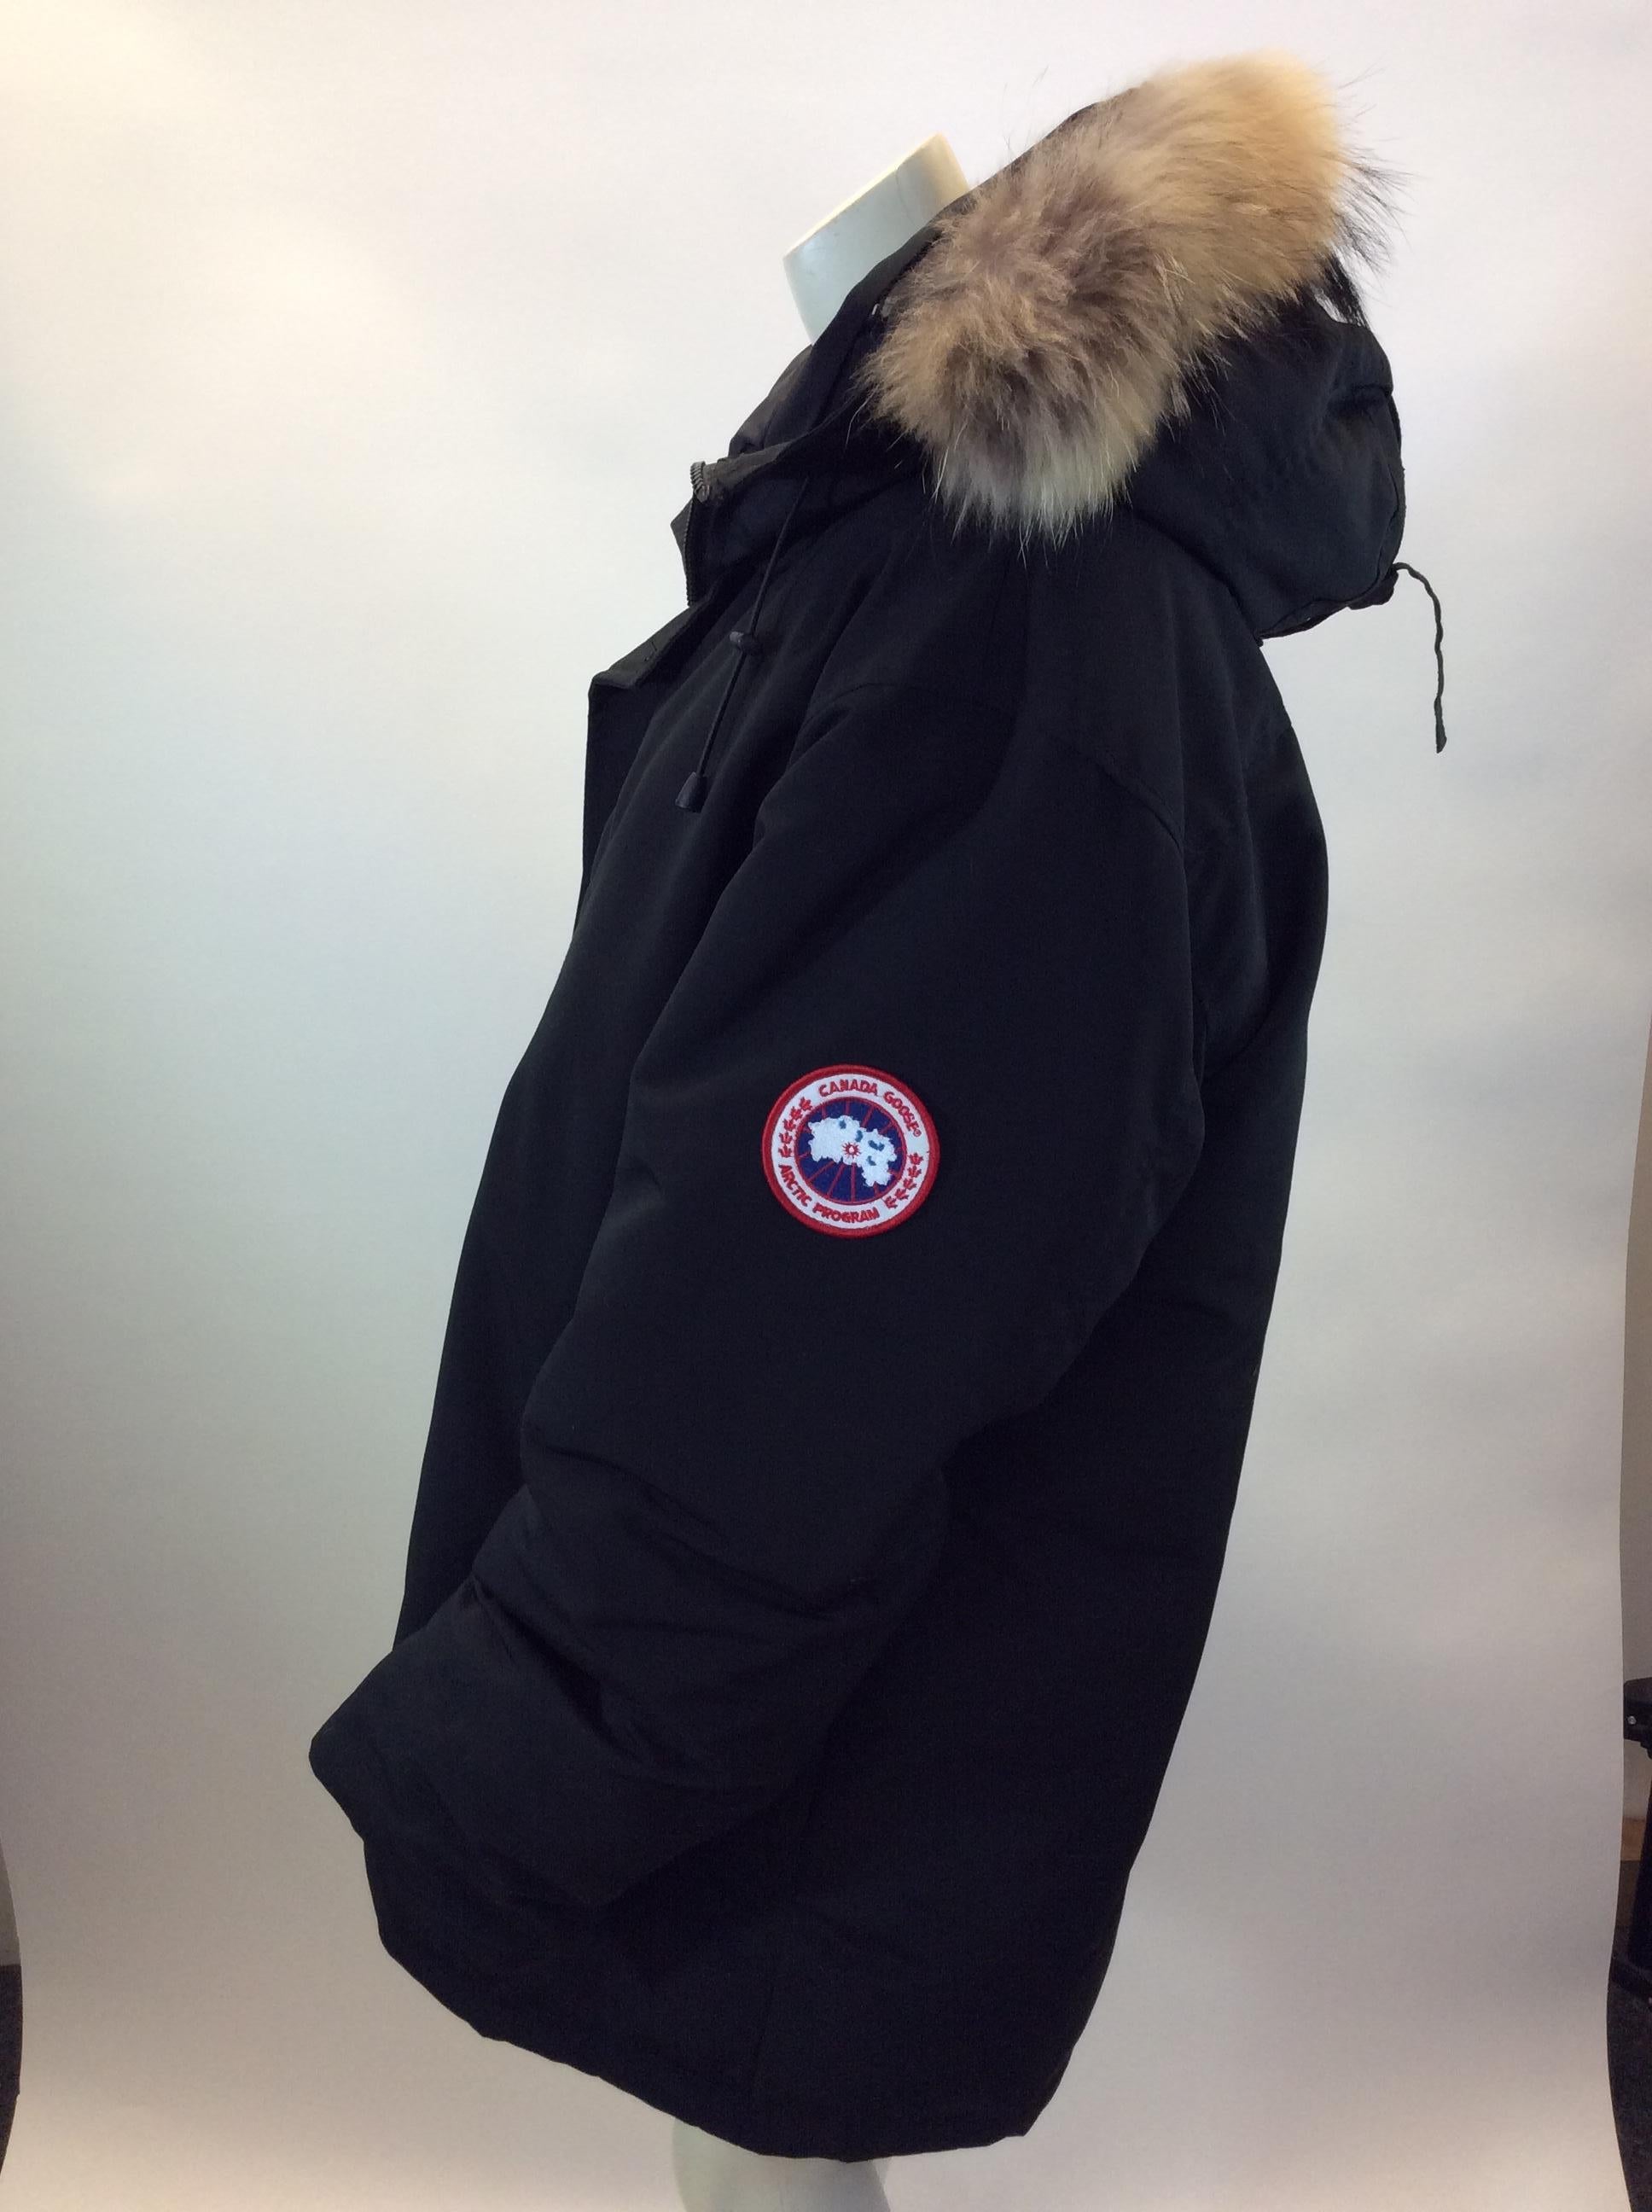 Canada Goose Black Fur Trimmed Coat
$450
Made in Canada
85% Polyester, 15% Cotton
Fill: White Duck Down
Natural Coyote Trim around hood
Size Large
Length 31